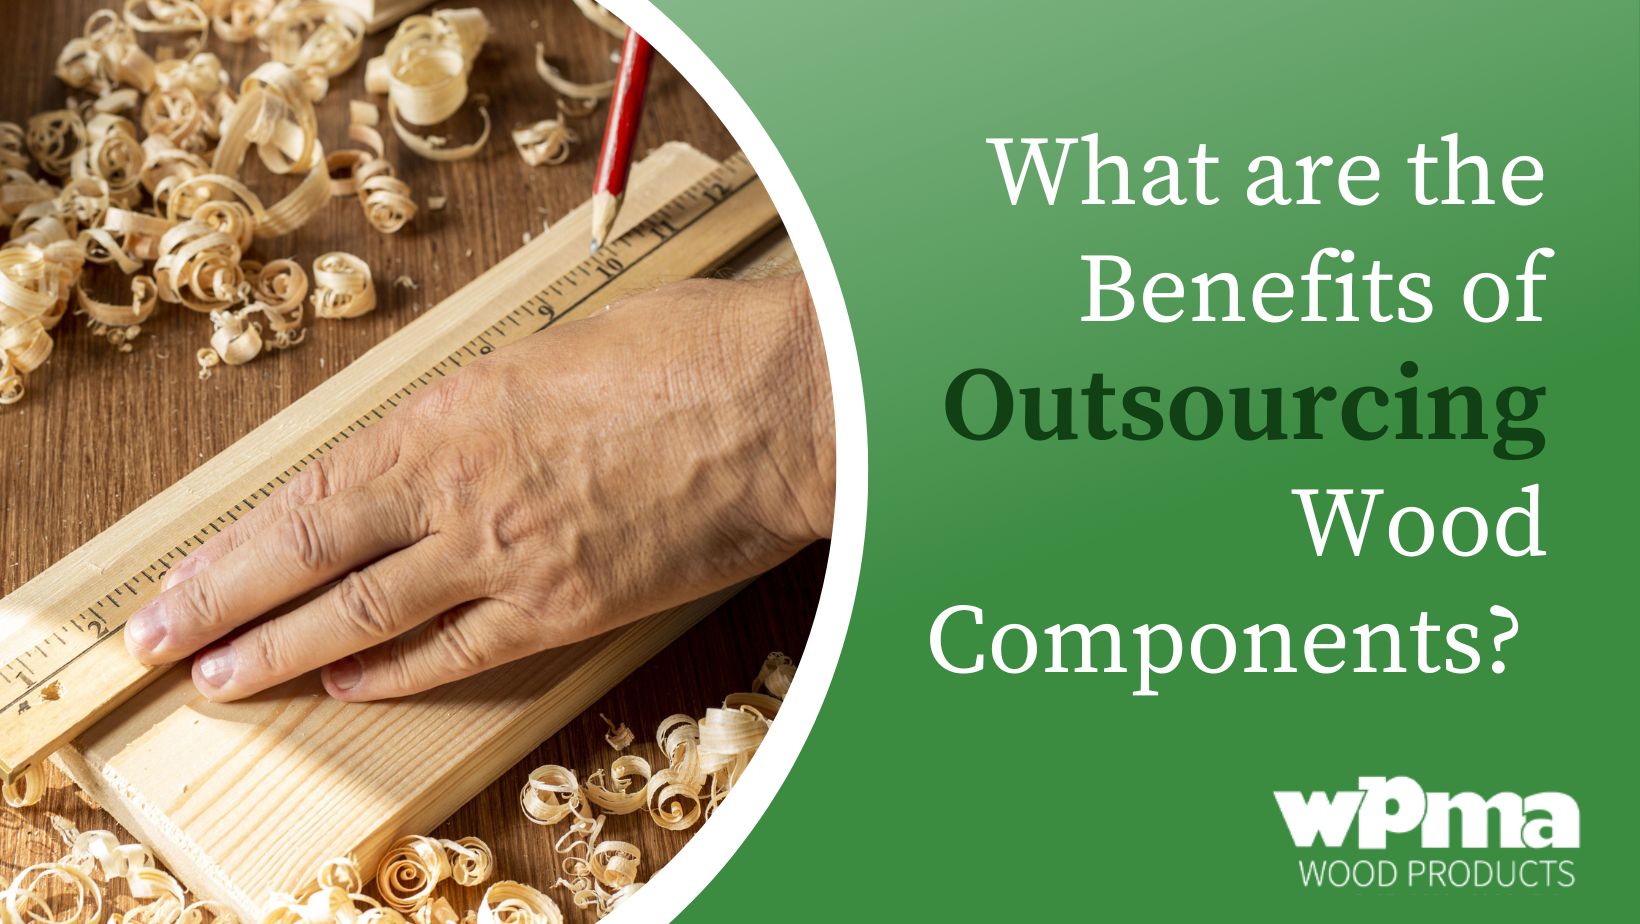 What are the Benefits of Outsourcing Wood Components?